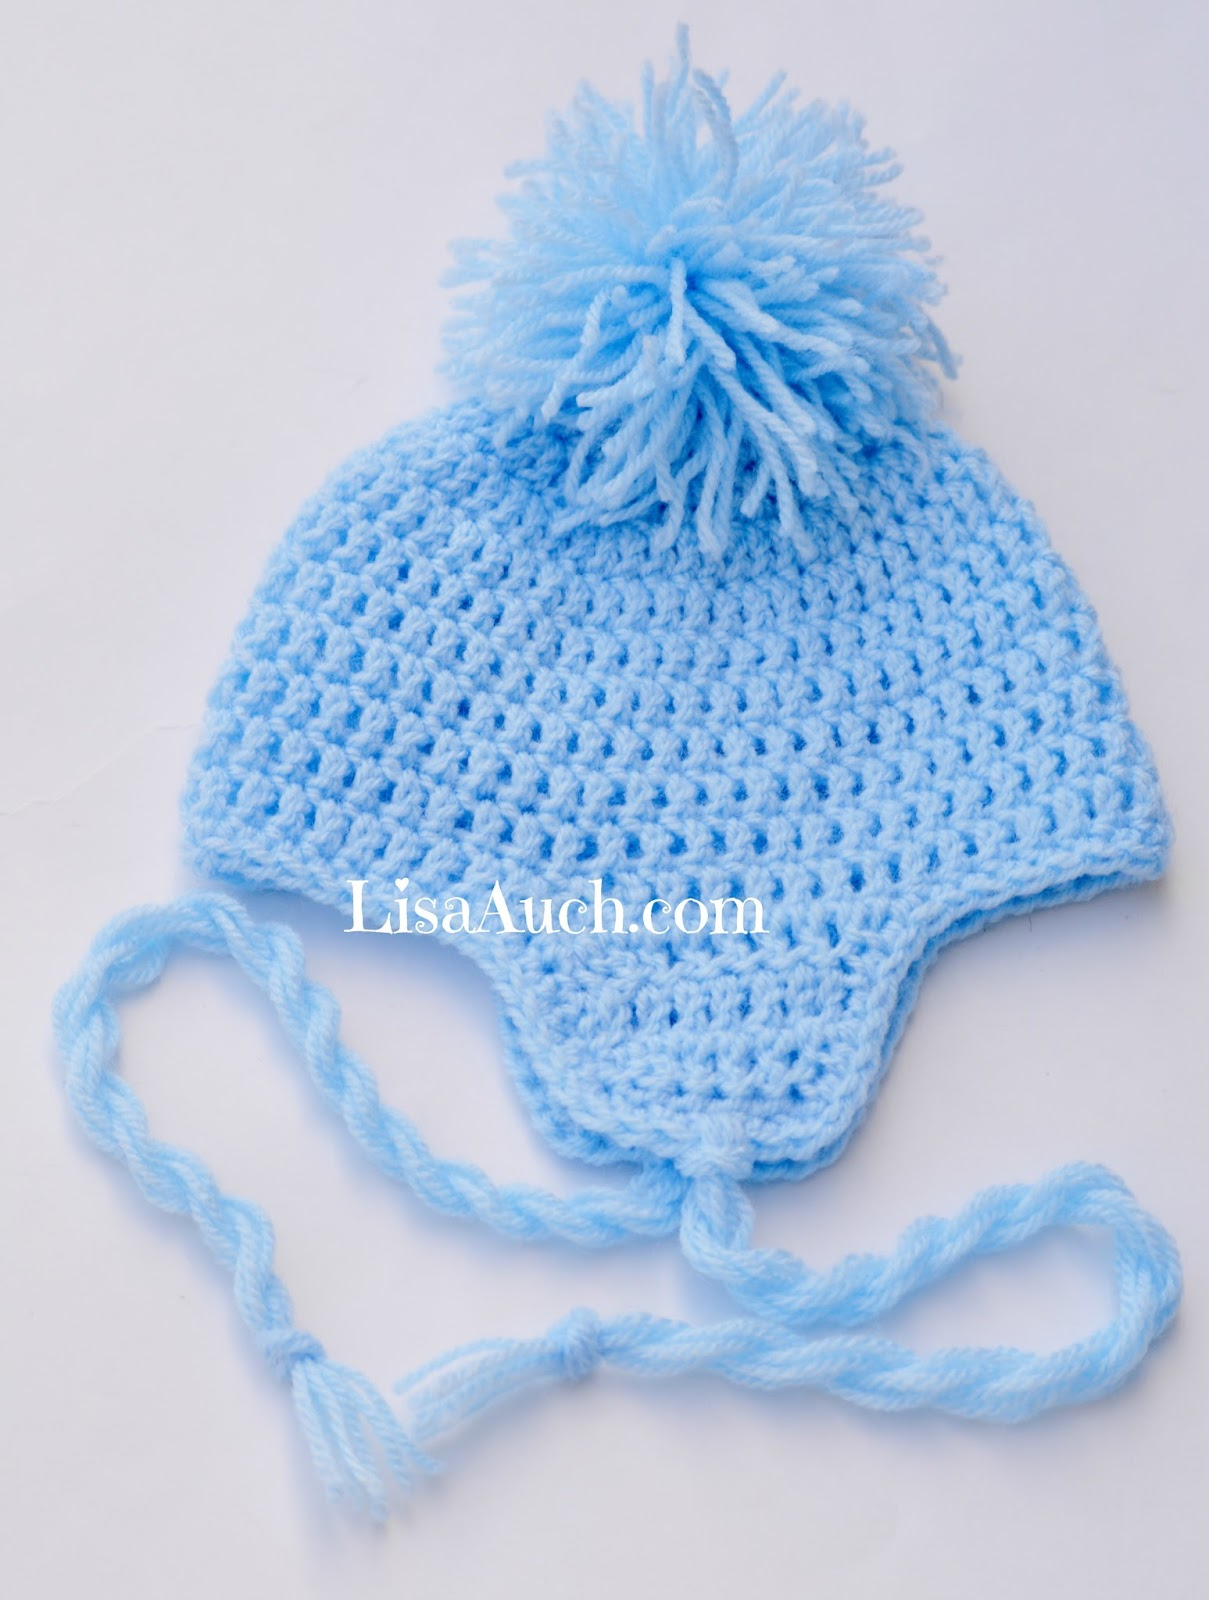 Baby Hats Crochet Patterns Free Crochet Patterns And Designs Lisaauch Free Crochet Ba Hat